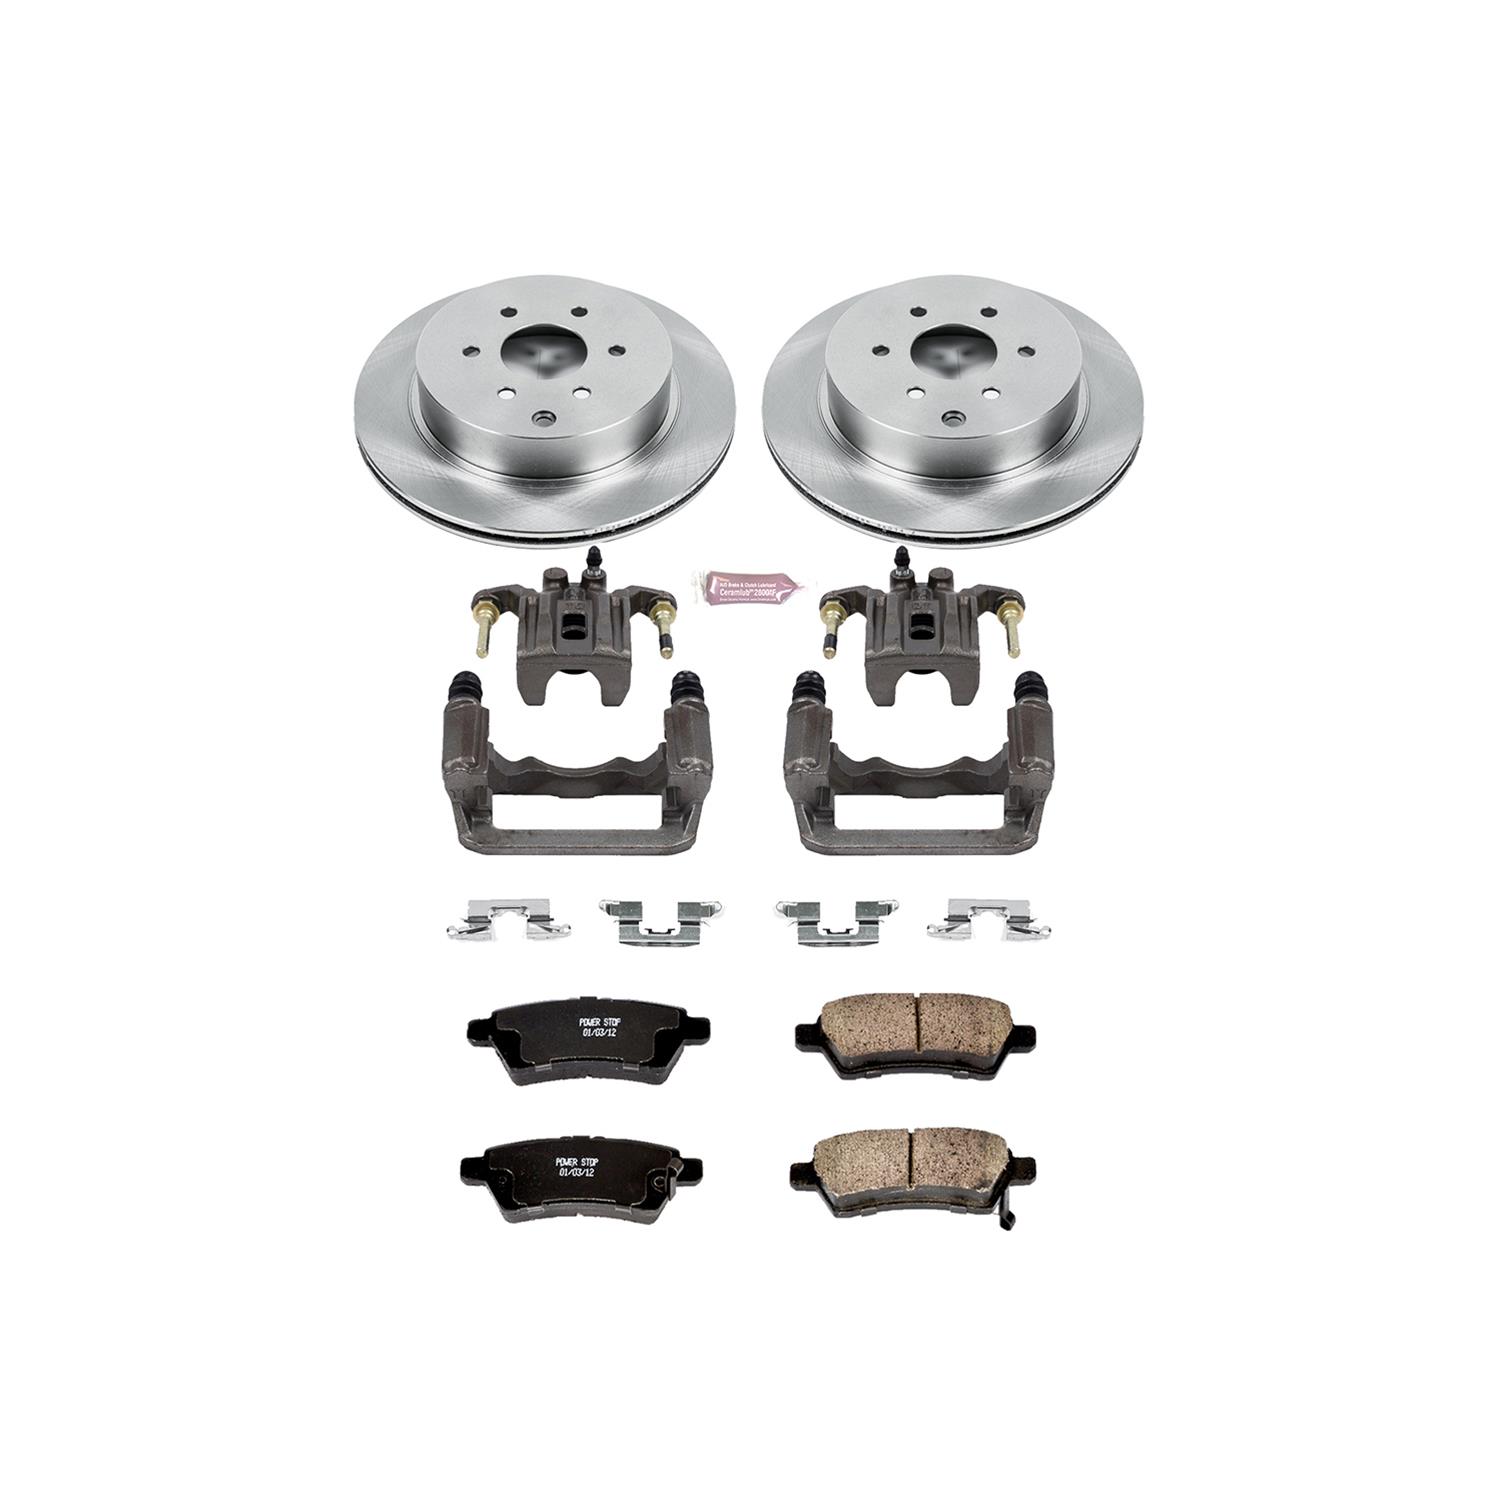 Power Stop Power Stop Z17 Evolution Plus Stock Replacement Brake Kits Calipers | Summit Racing